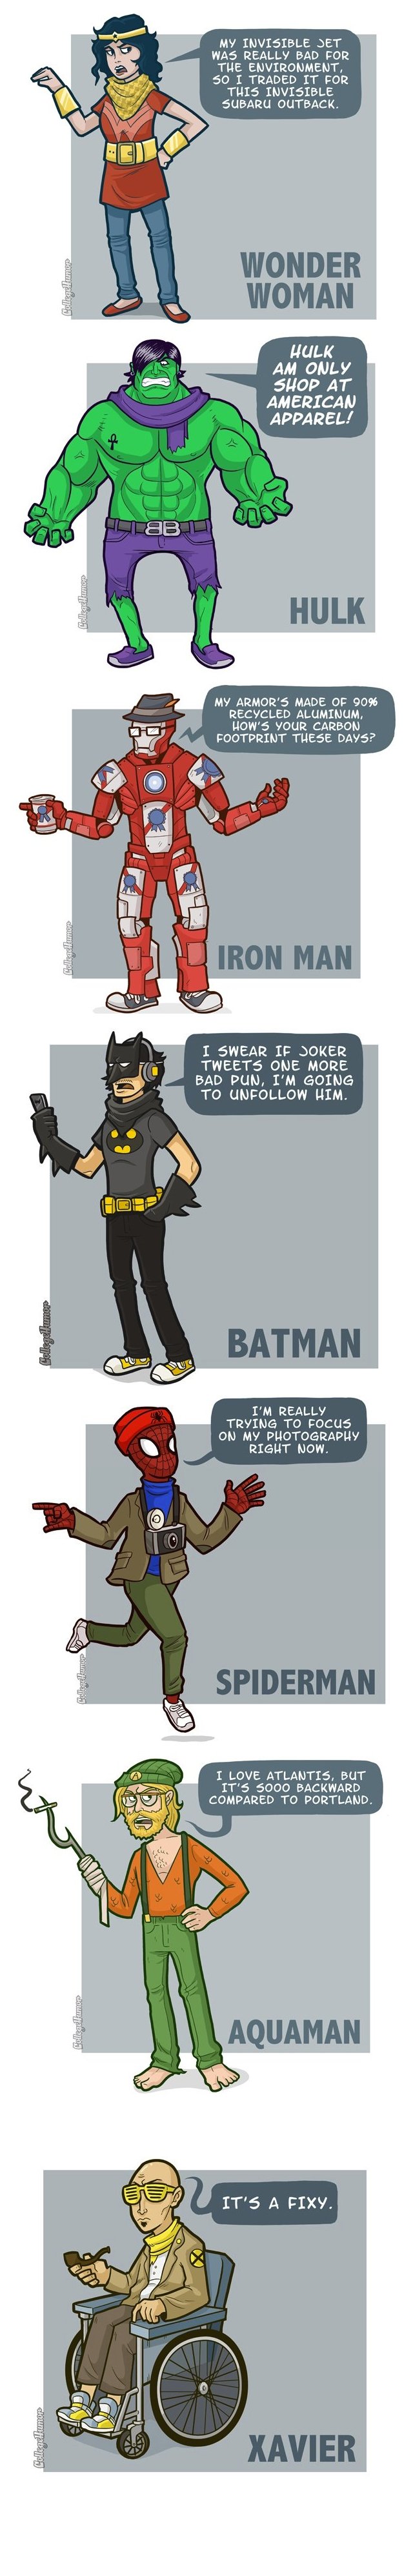 Hipsters as Superheroes. Yah from CH&lt;br /&gt; &lt;br /&gt; WATCH ME DESTROY MY DVR!!!&lt;br /&gt; &lt;a href=&quot;On7buoKQ&quot; target=blank&gt;www.youtube